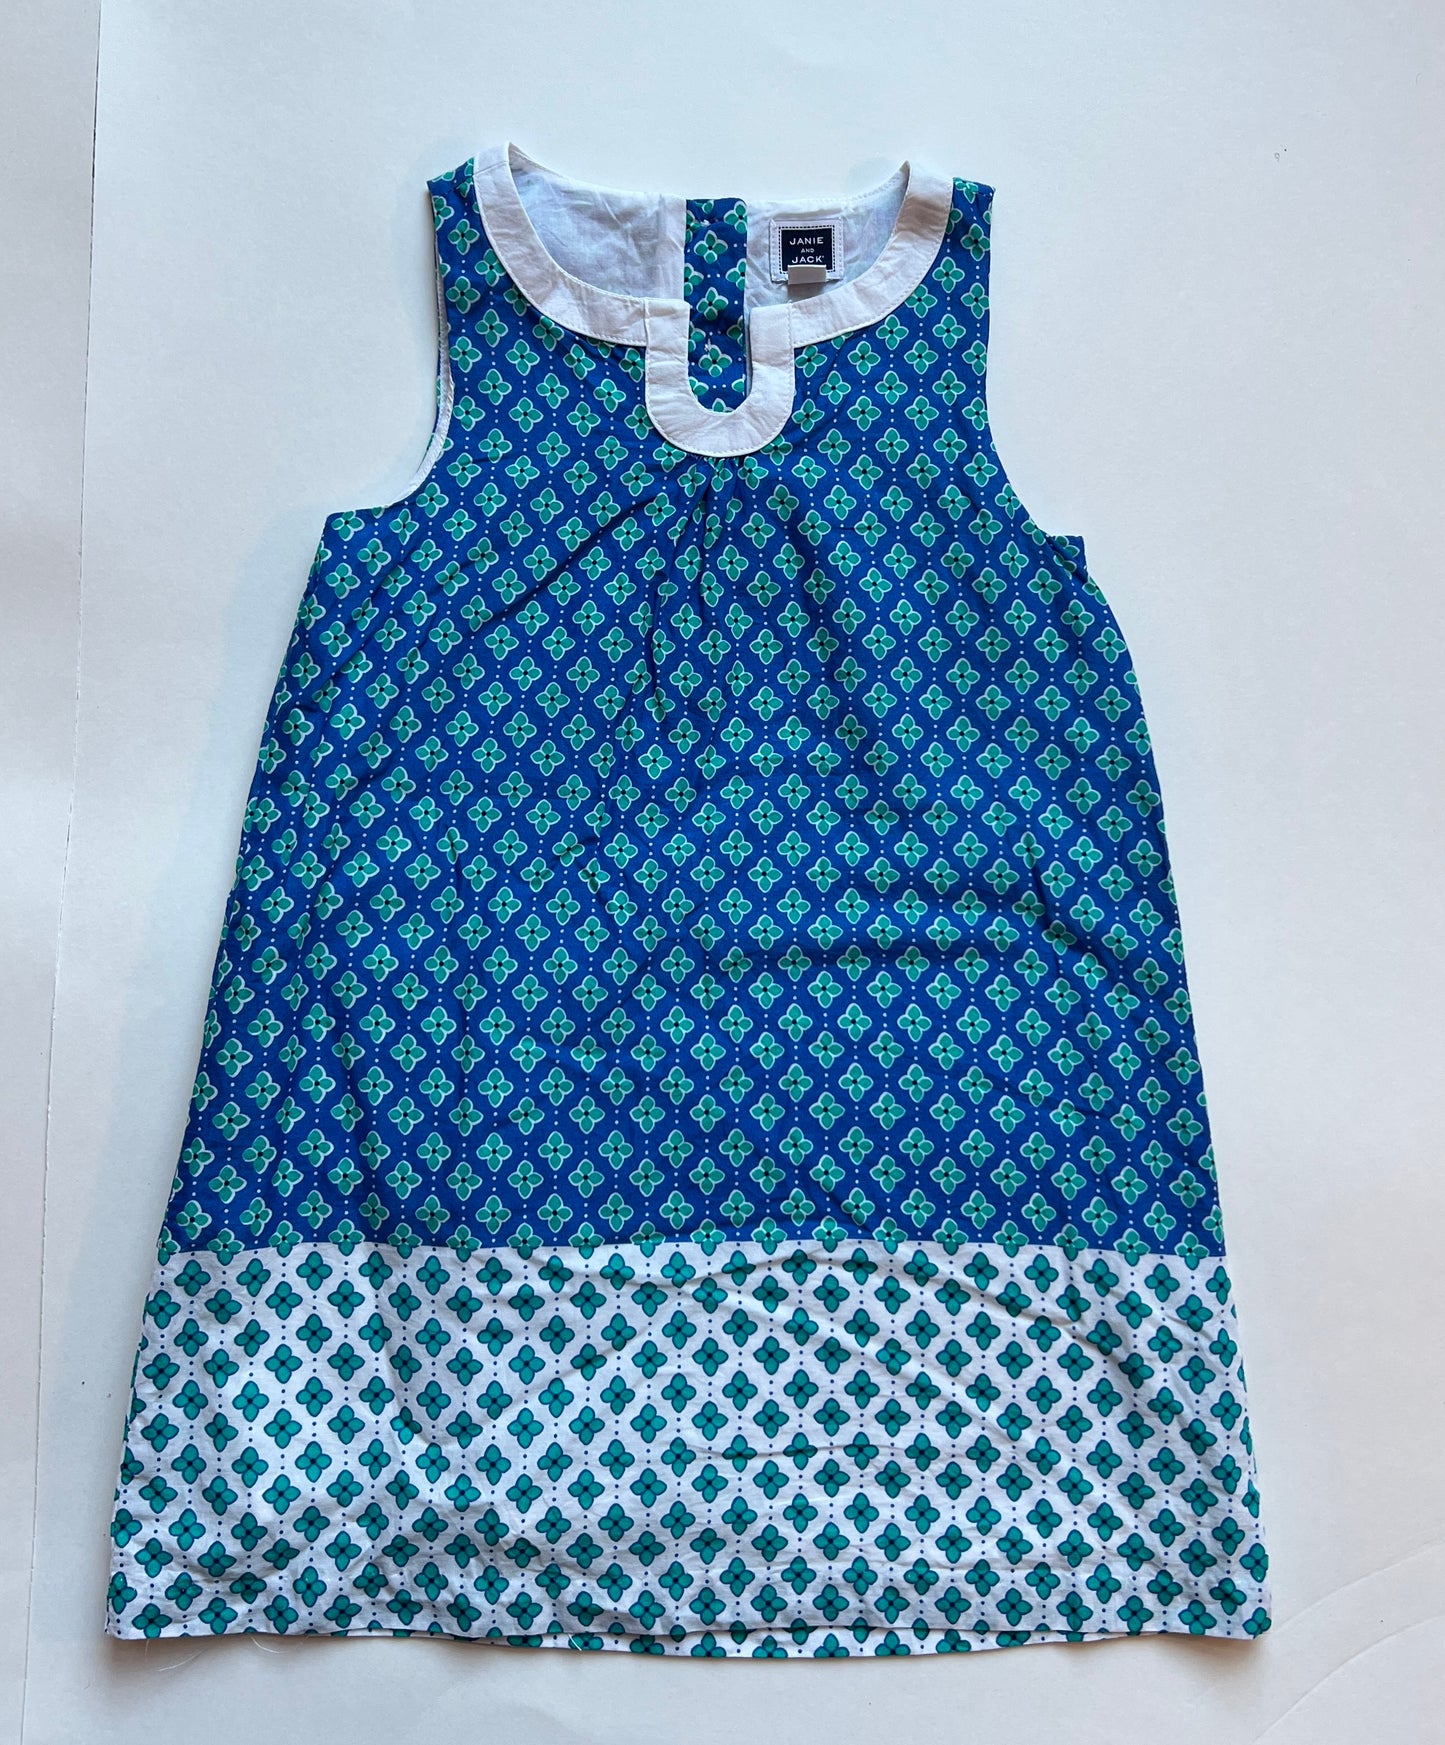 Girls 3Y Janie and Jack Blue and Teal Sundress